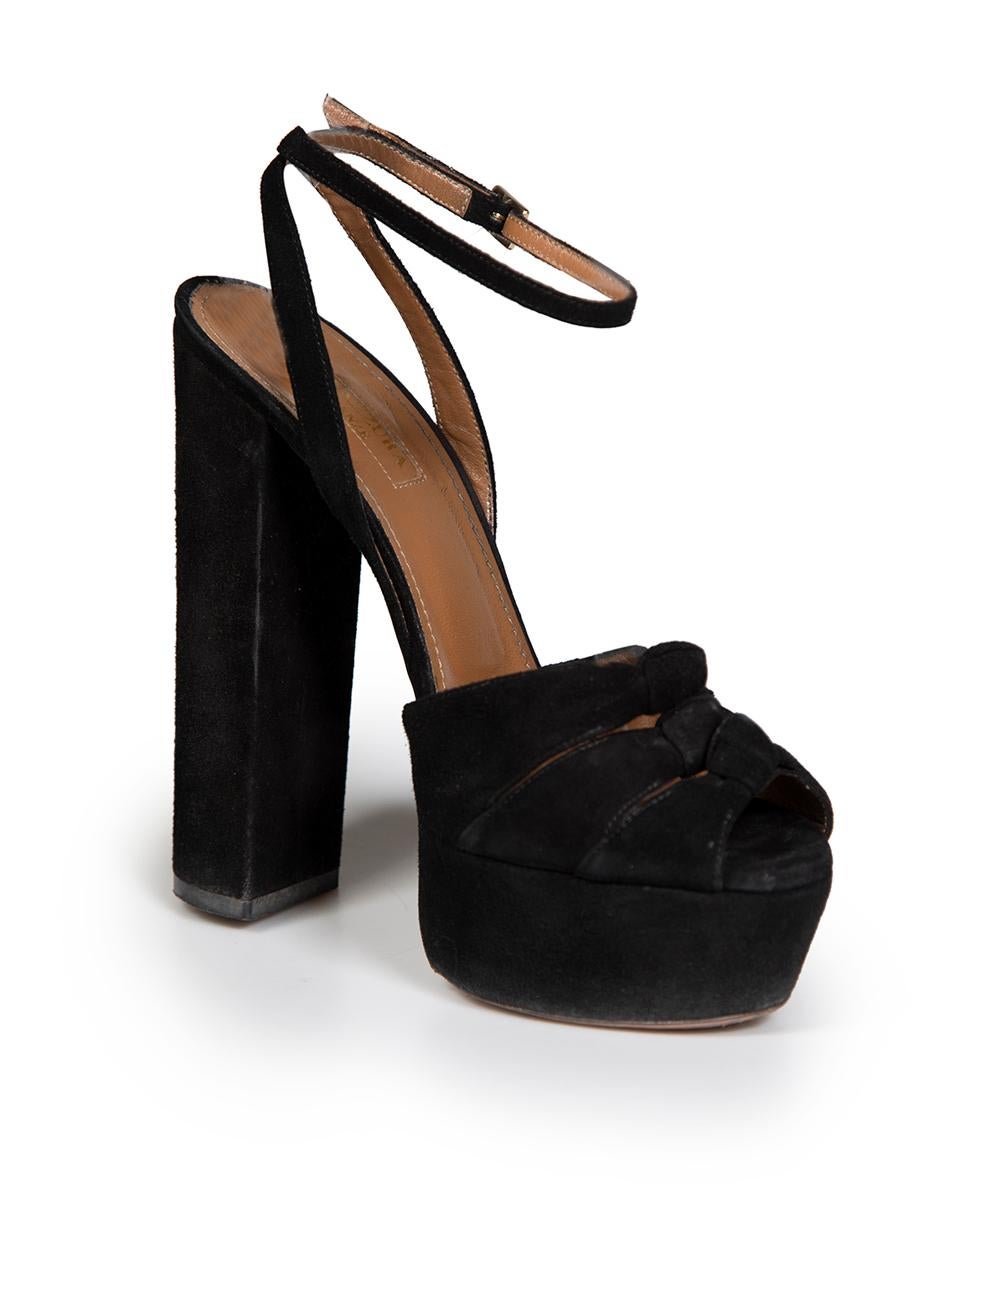 CONDITION is Good. Minor wear to heels is evident. Light wear to soles and abrasion to suede bow on this used Aquazzura designer resale item. These shoes come with dust bag.
 
 
 
 Details
 
 
 Black
 
 Suede
 
 Sandals
 
 High heeled
 
 Platform
 
